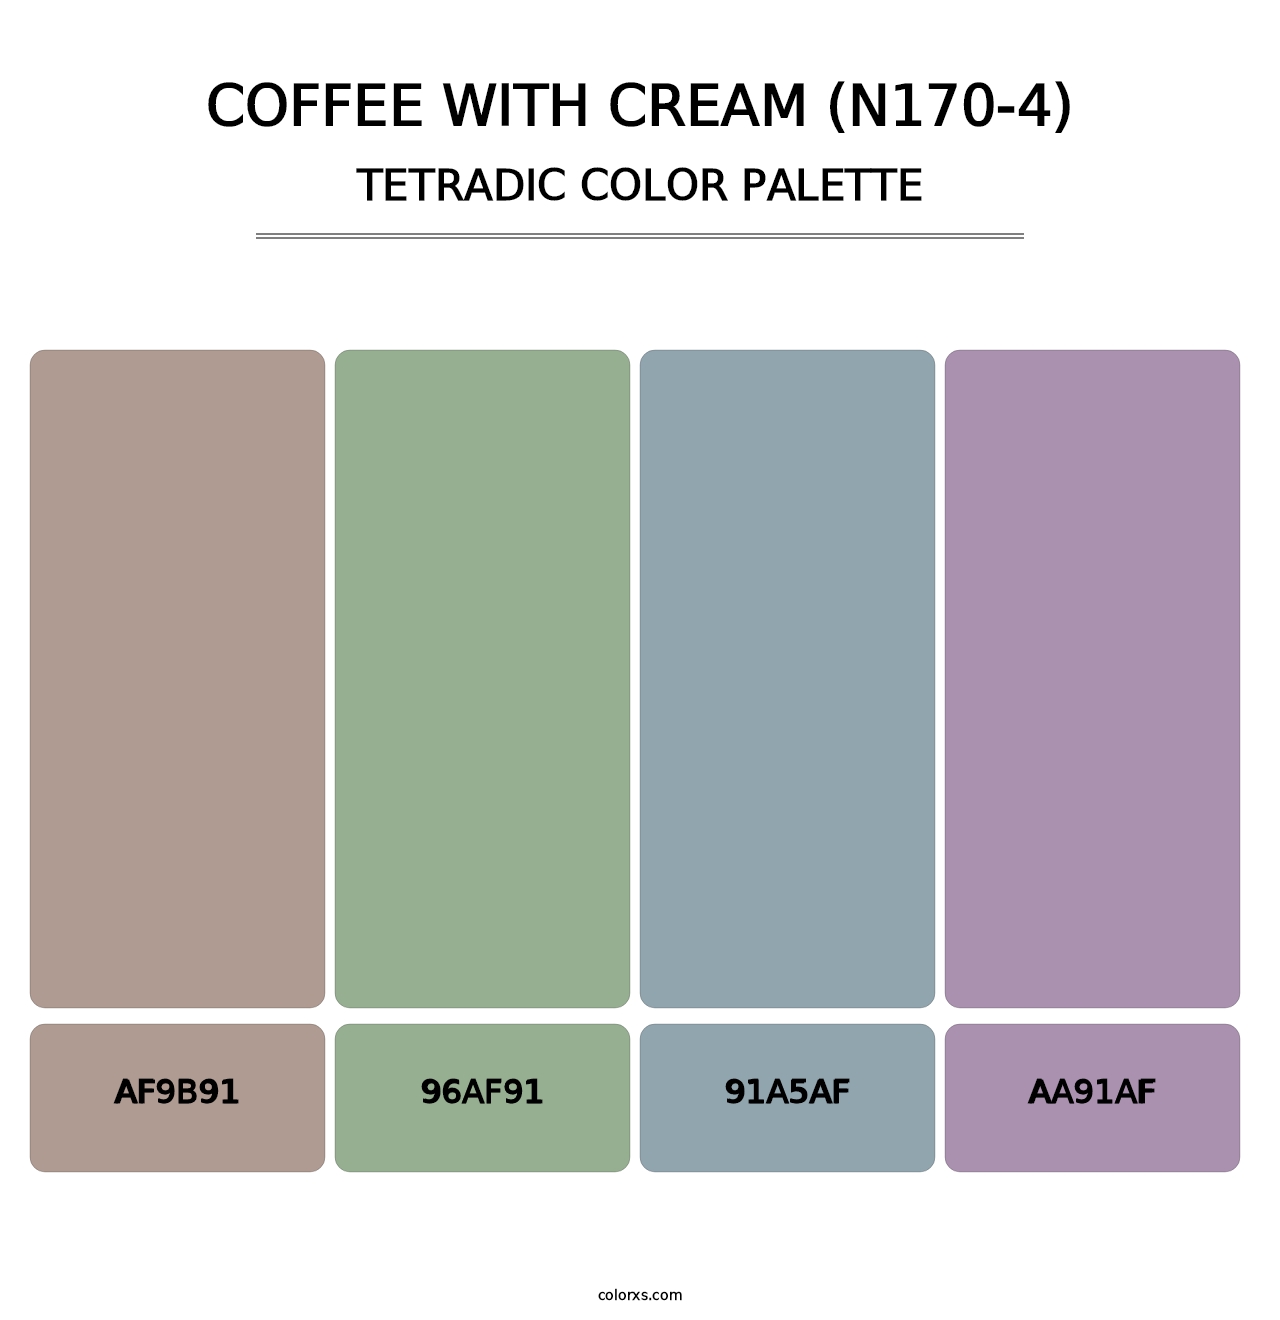 Coffee With Cream (N170-4) - Tetradic Color Palette